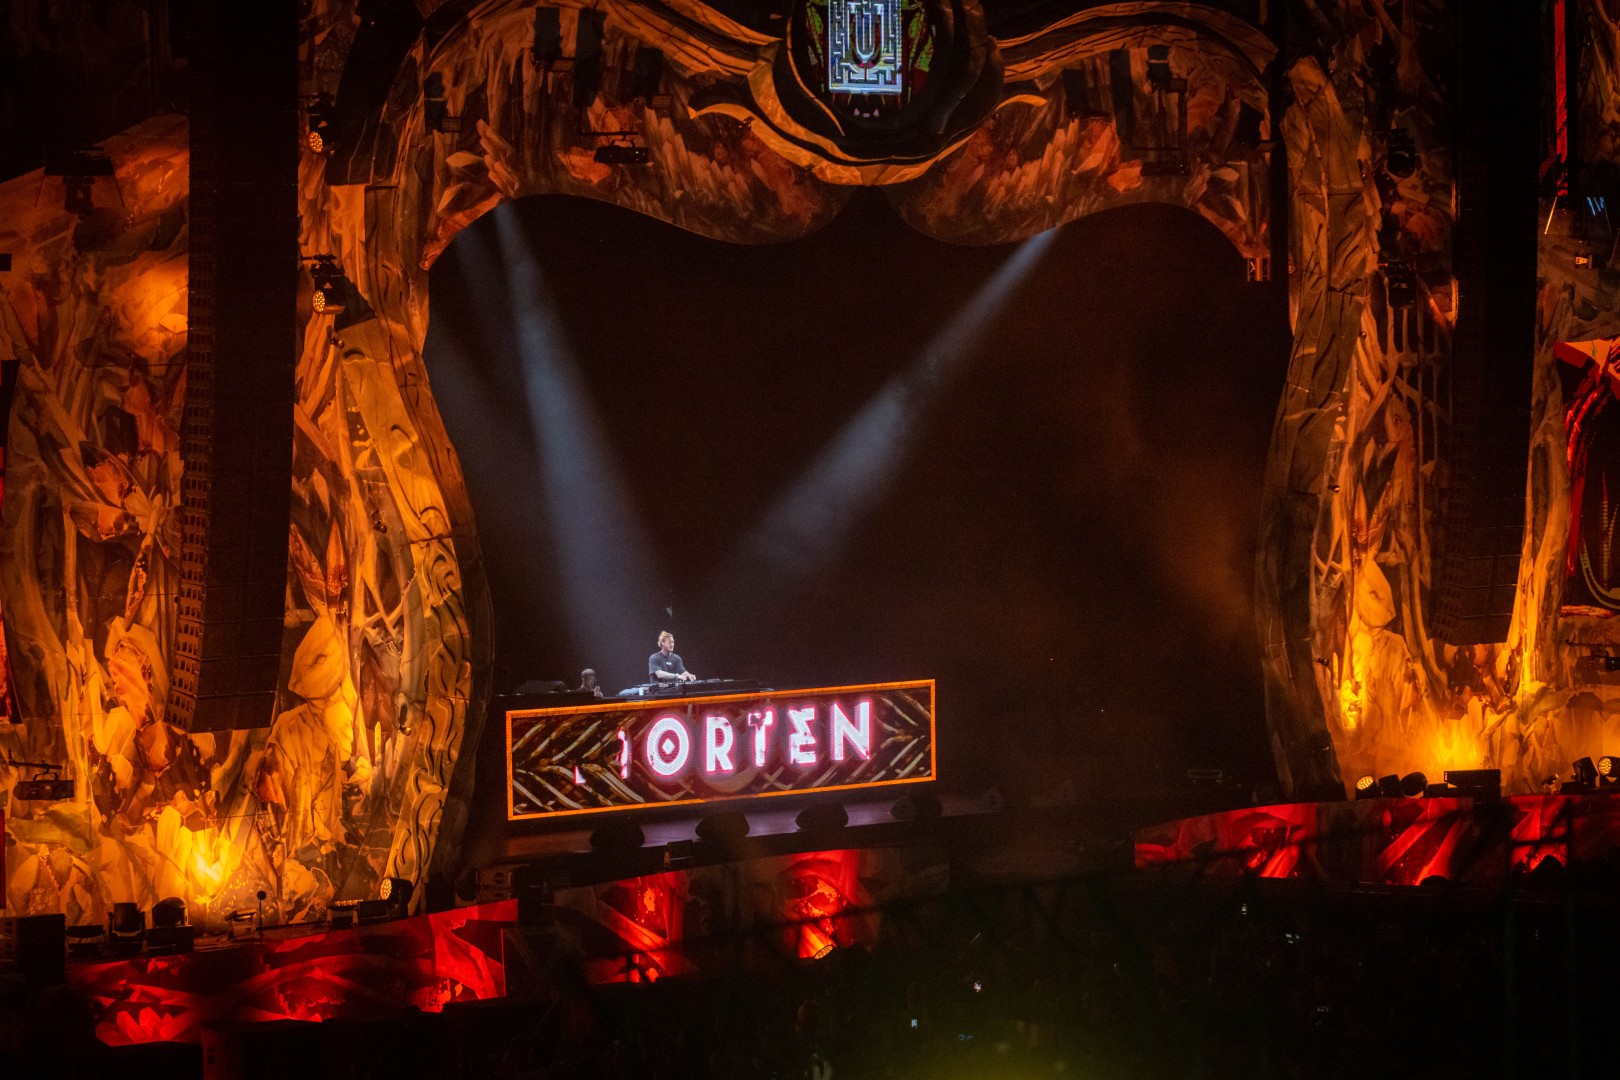 Morten at Cluj Arena in Cluj-Napoca on August 5, 2022 (e79ff60807)